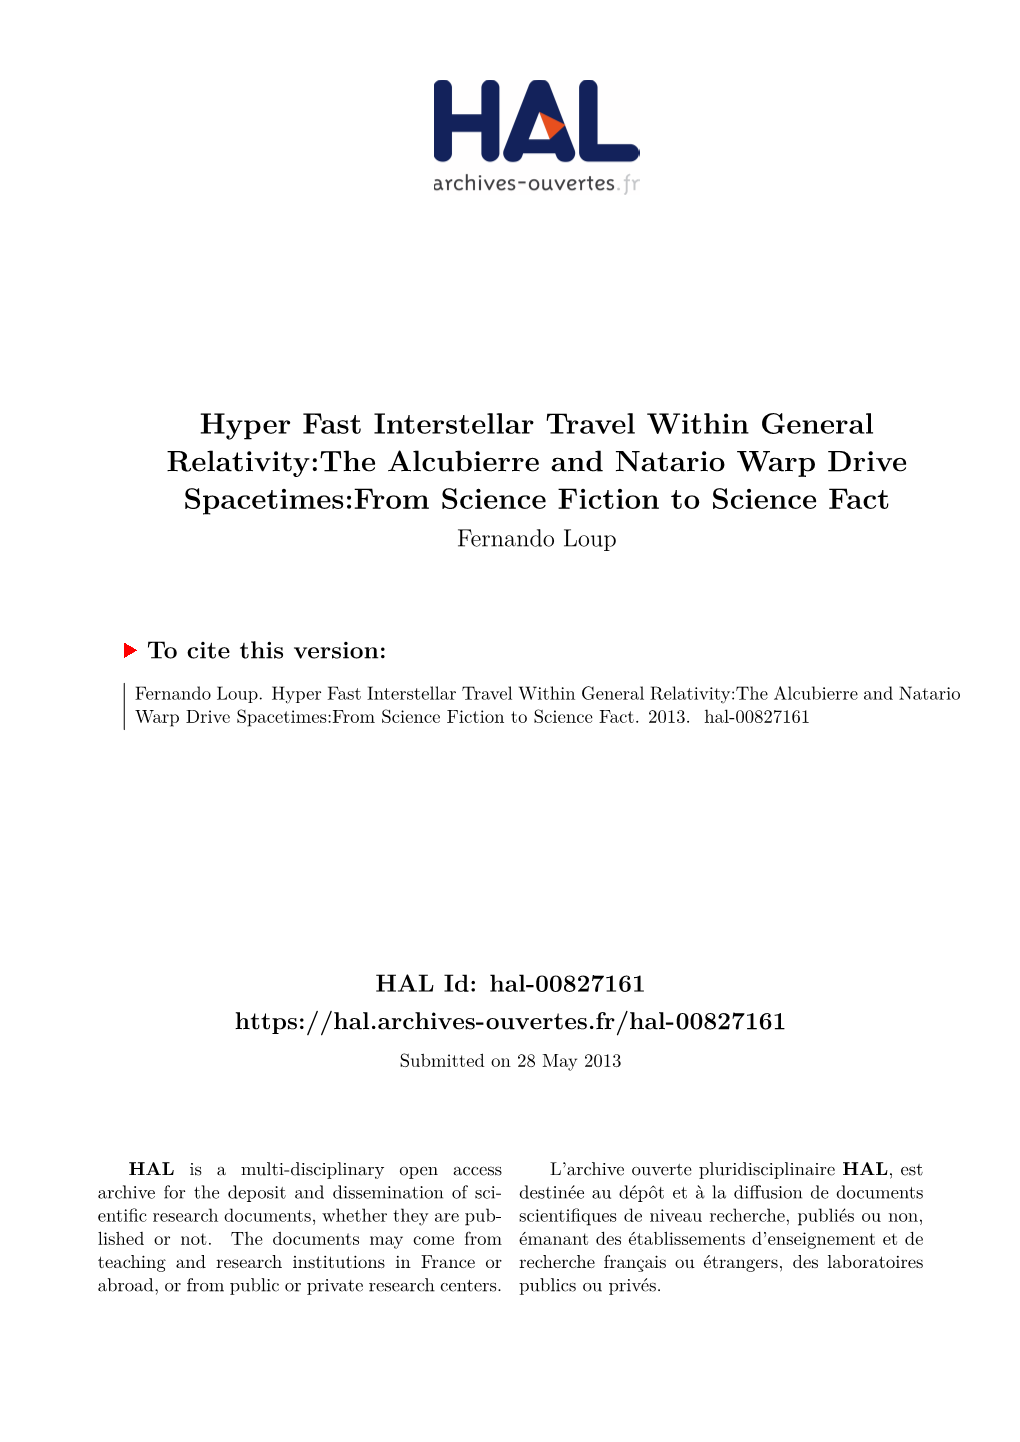 hyper fast travel within general relativity